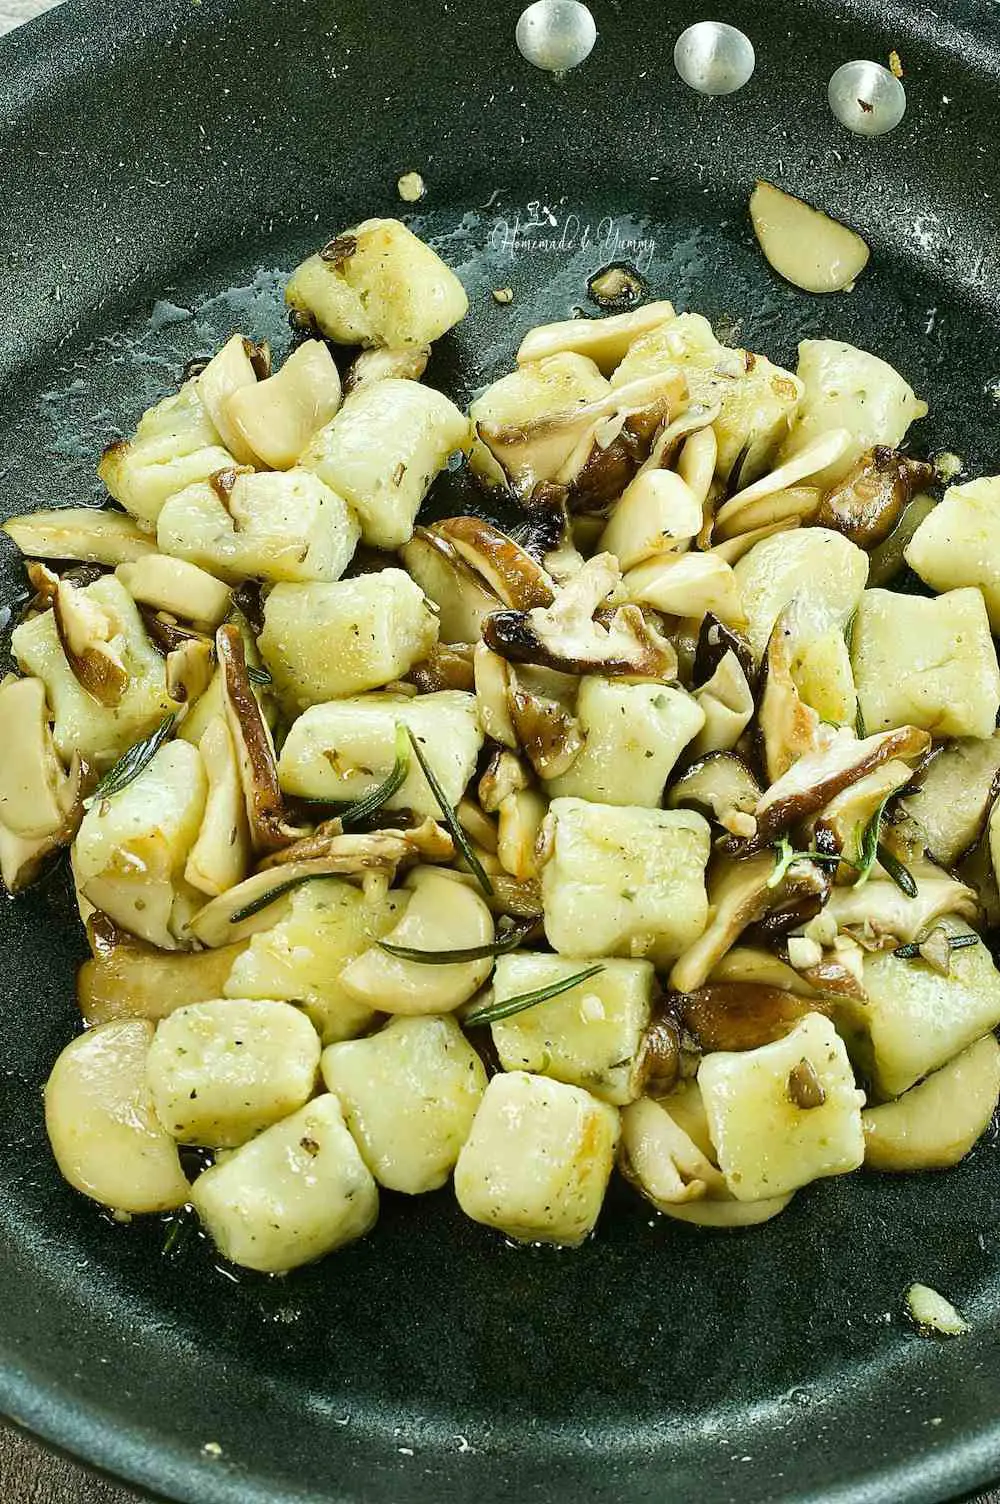 Combining the cooked mushrooms and cooked gnocchi together in a frying pan.